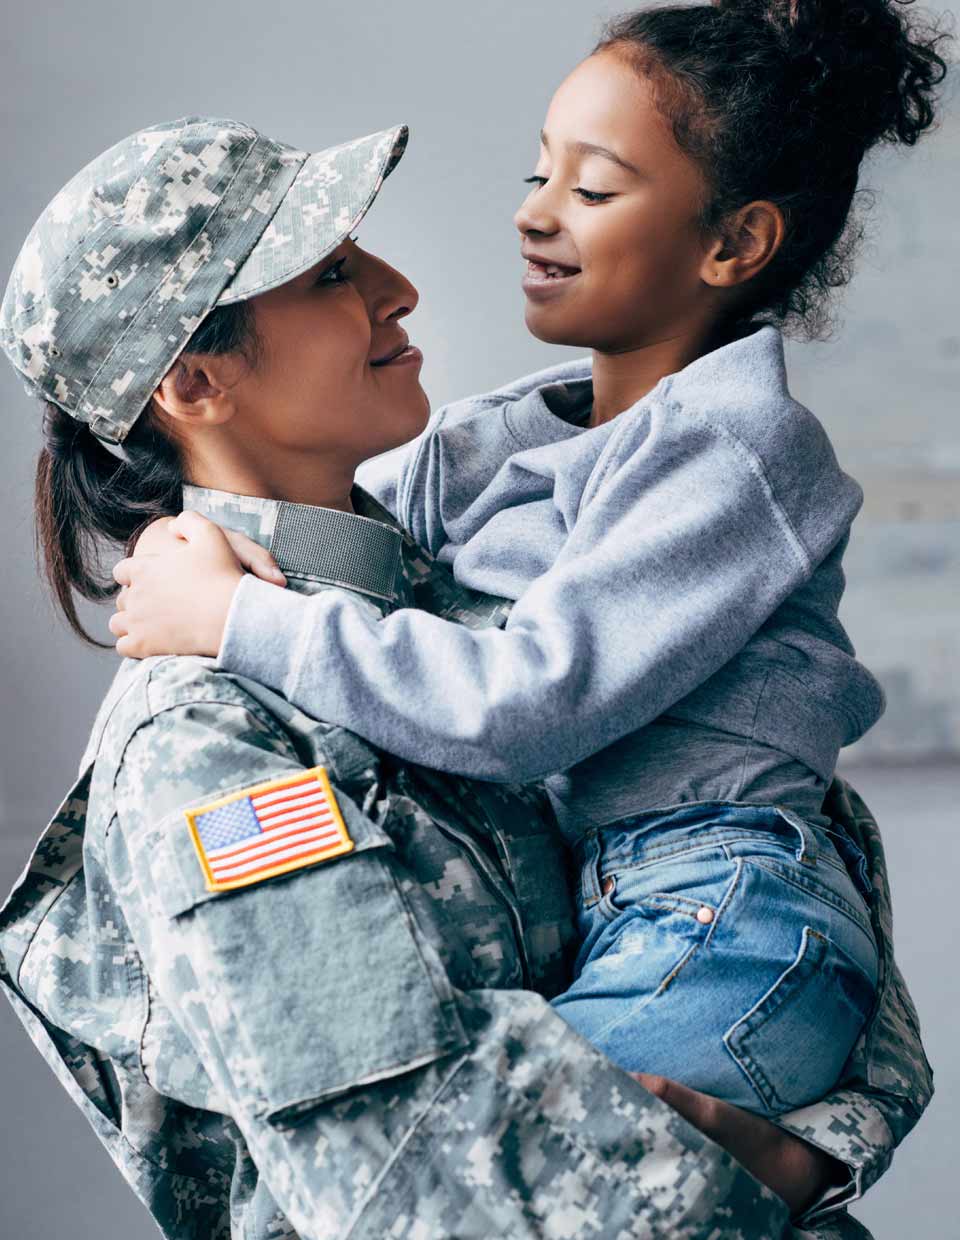 promo image for military woman and her young daughter